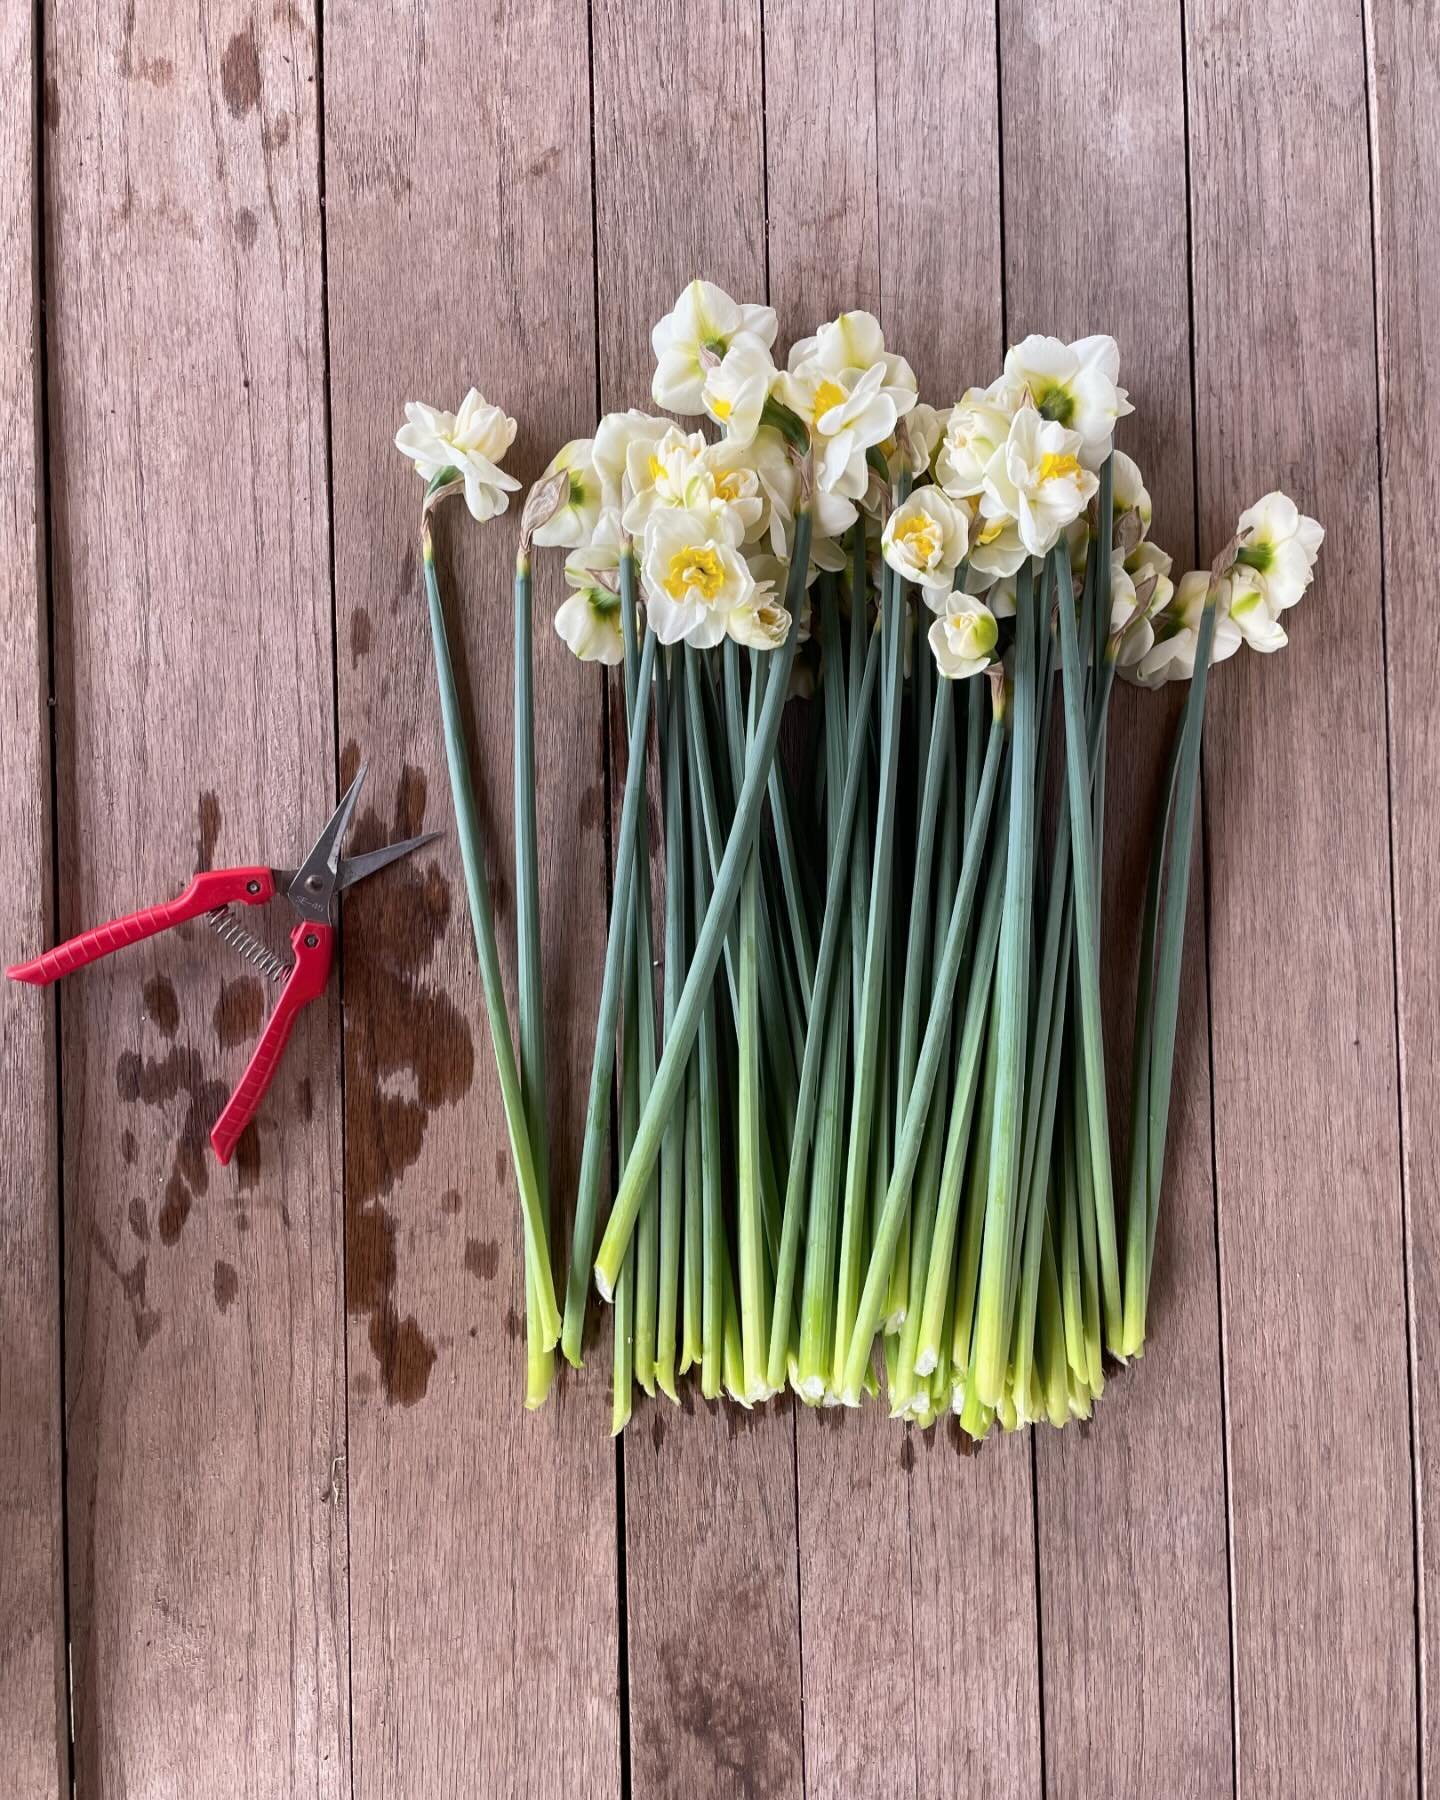 The daffodils this year are so good. Tall and very productive and just delightful. Some folks pull them when harvesting, but we use snow to get further down into the plant for the longest stems. Do you pull or cut or leave them alone??